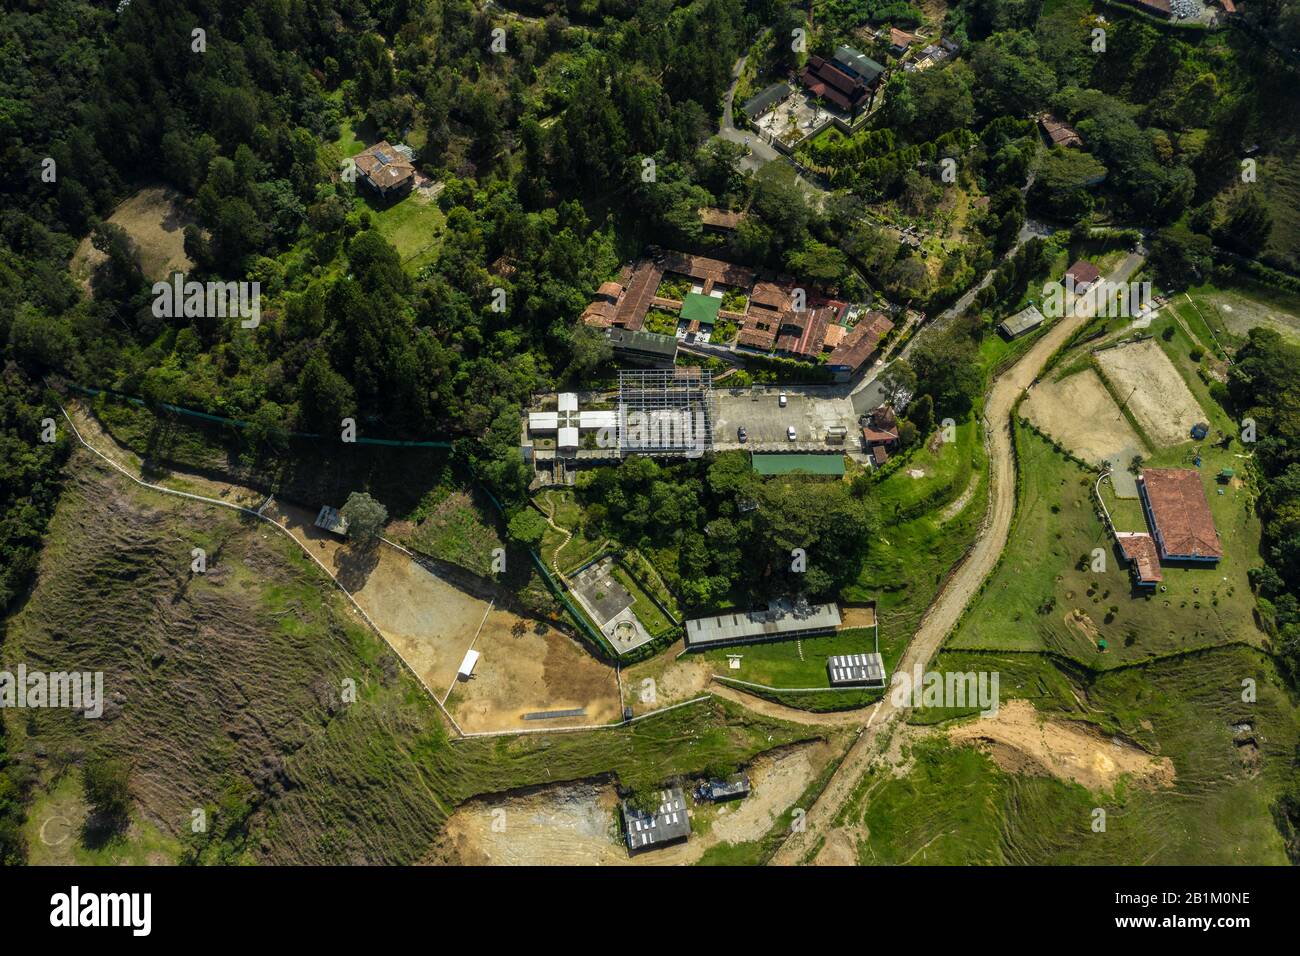 La Catedral Inside The Luxurious Prison Colombia Allowed Pablo Escobar To Make For Himself Top View Stock Photo Alamy